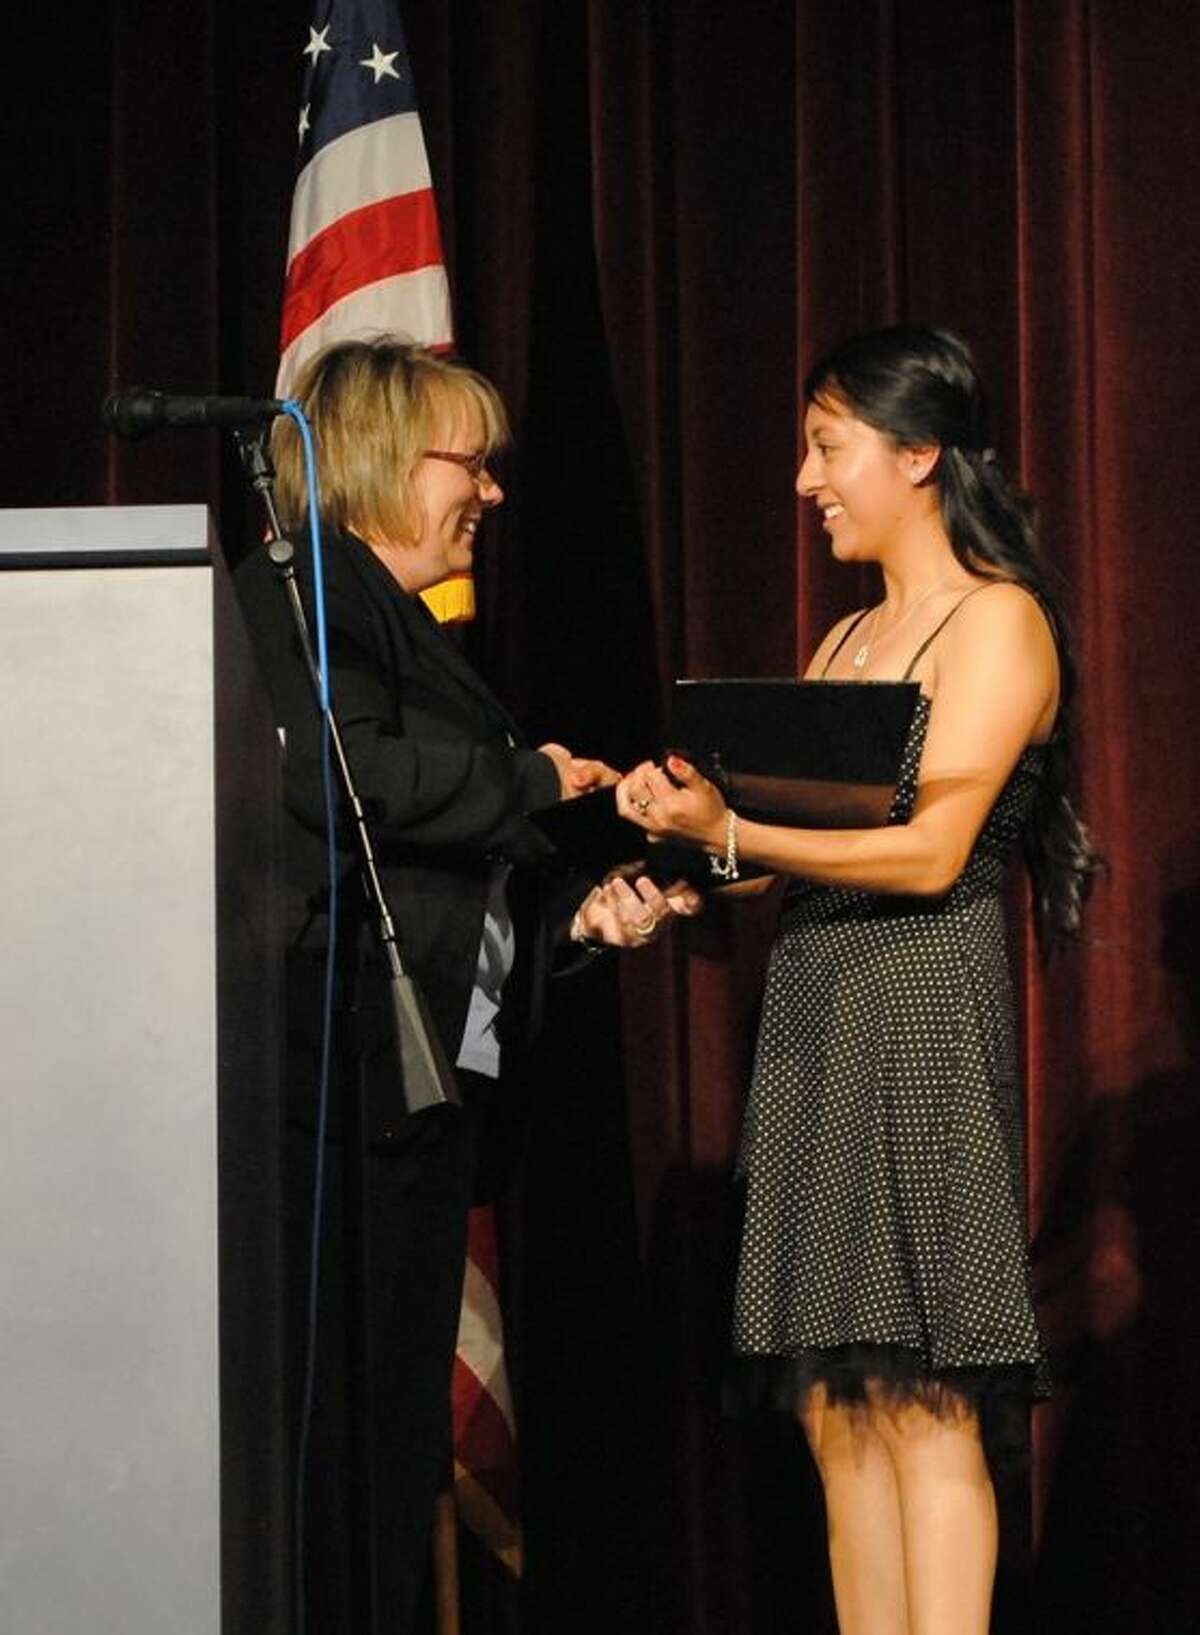 ACC Foundation Executive Director Wendy Del Bello, left, hands a scholarship award to Alvin High School student Miriam Higuera during Award Night at the school in 2013.